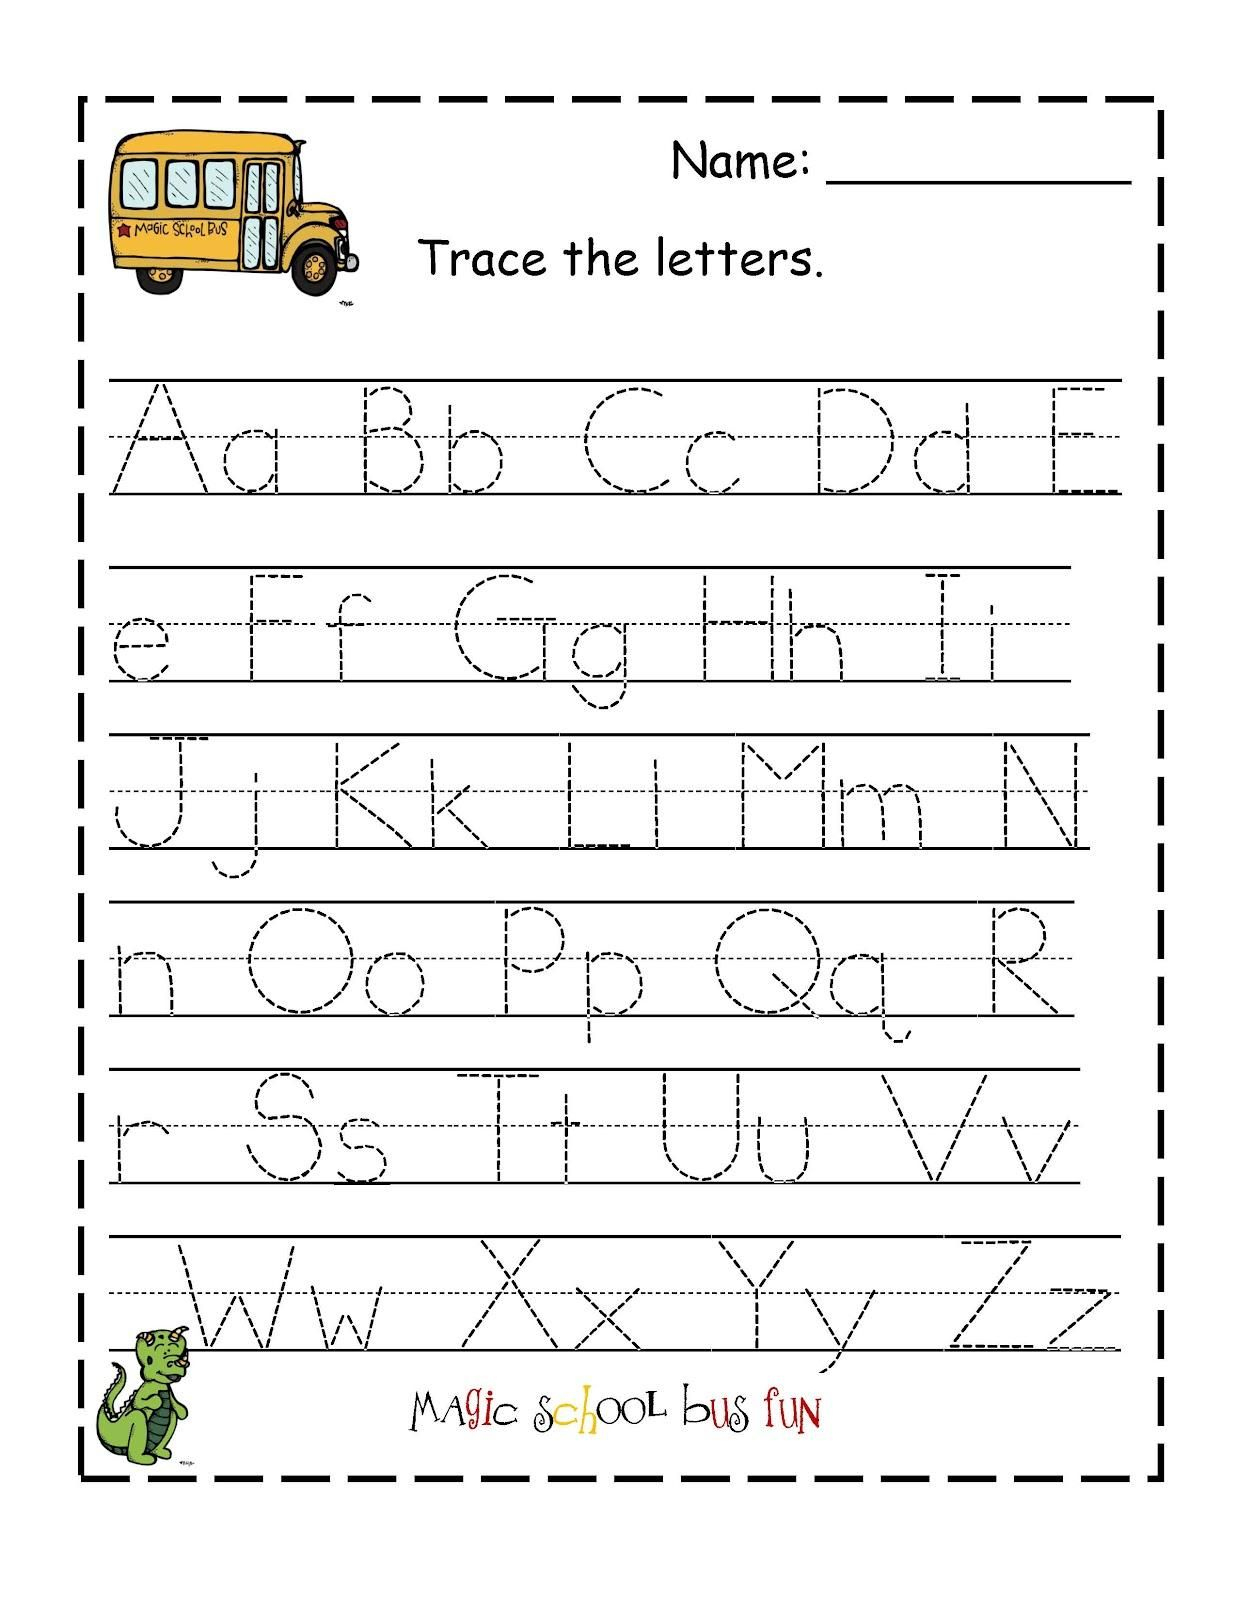 Free Printable Abc Tracing Worksheets #2 | Places To Visit | Printable Abc Letters Worksheets